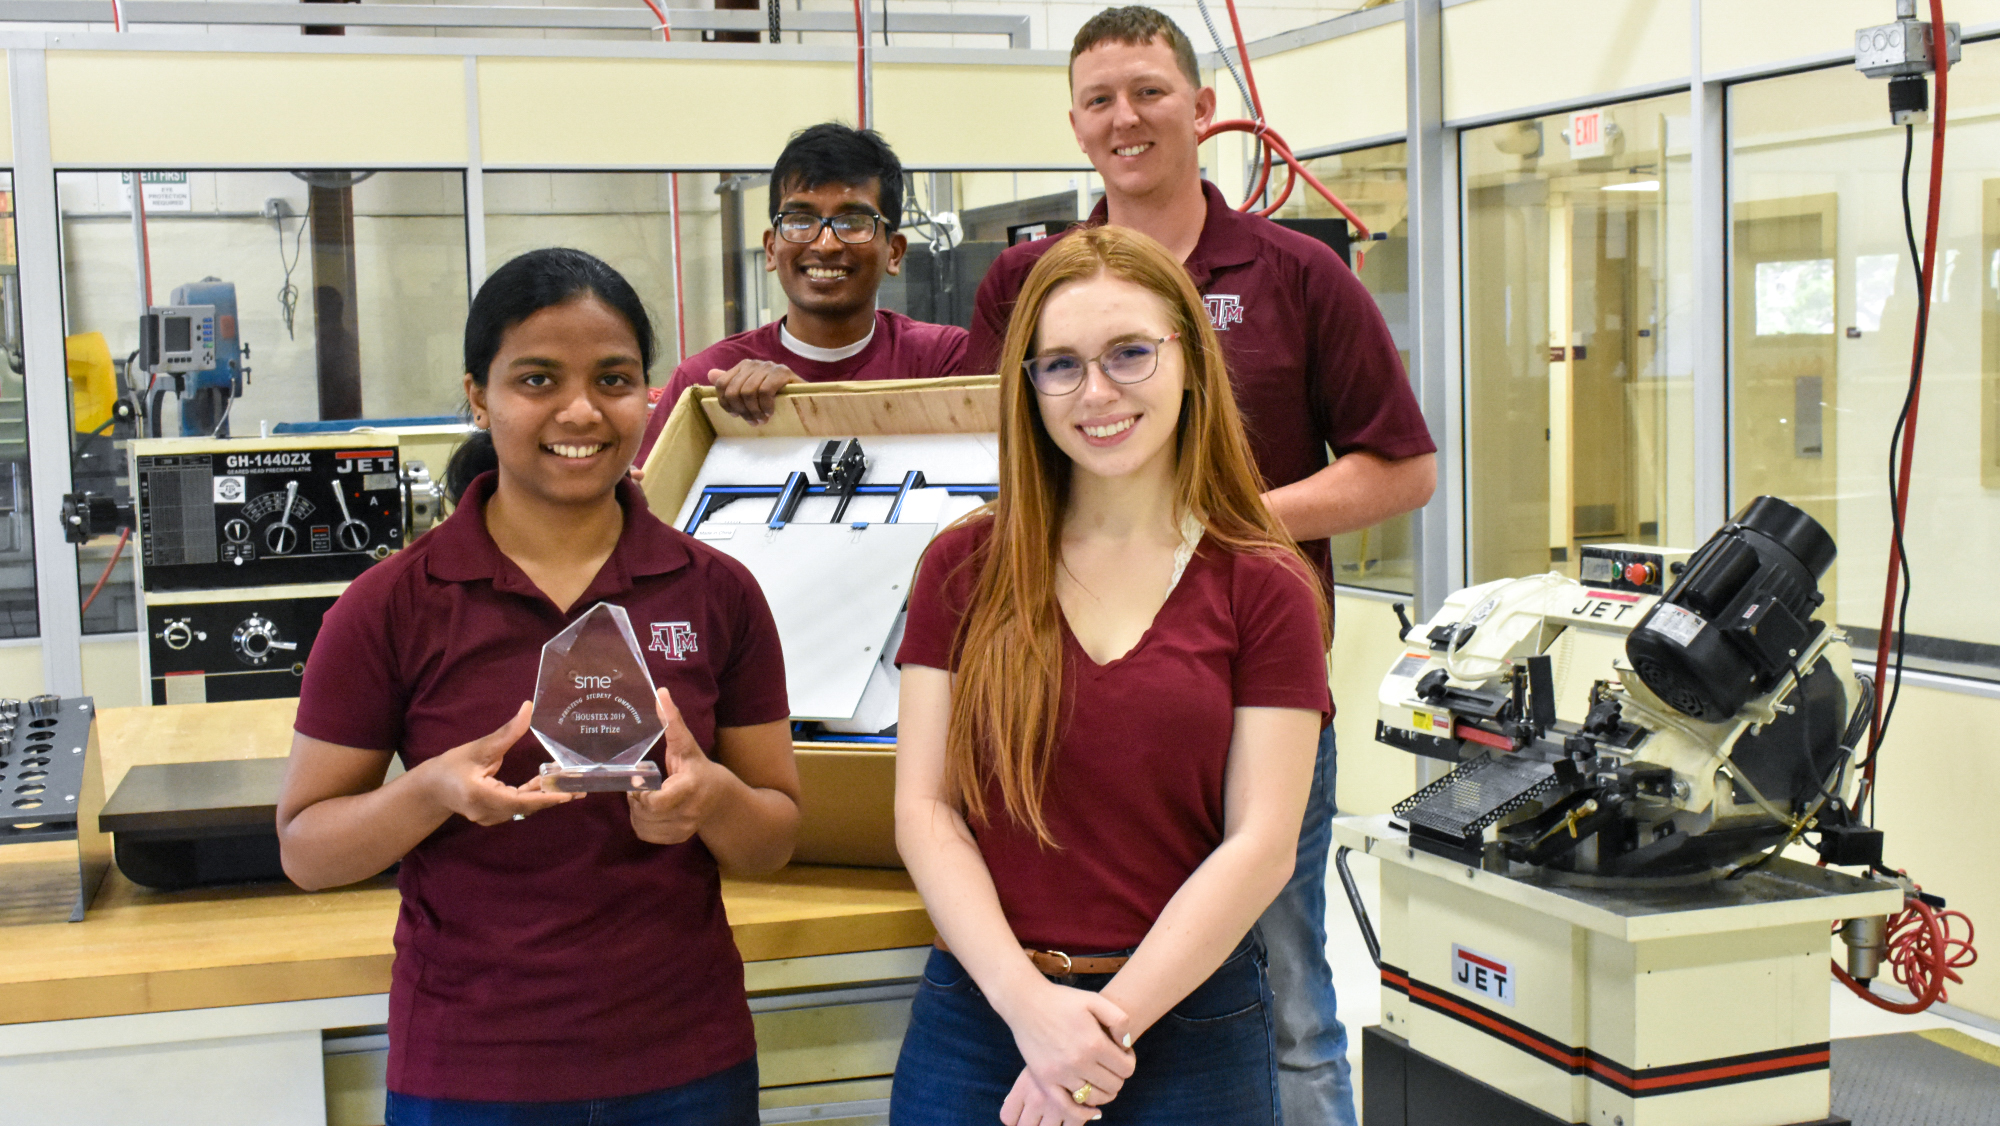 1st place winners of Houstex Competition (from left to right): Amla Patil (MEEN), Kara Laughbaum (ENGL), Shyam Balasubramanian (MEEN), and Kenneth Doyle (ETID).